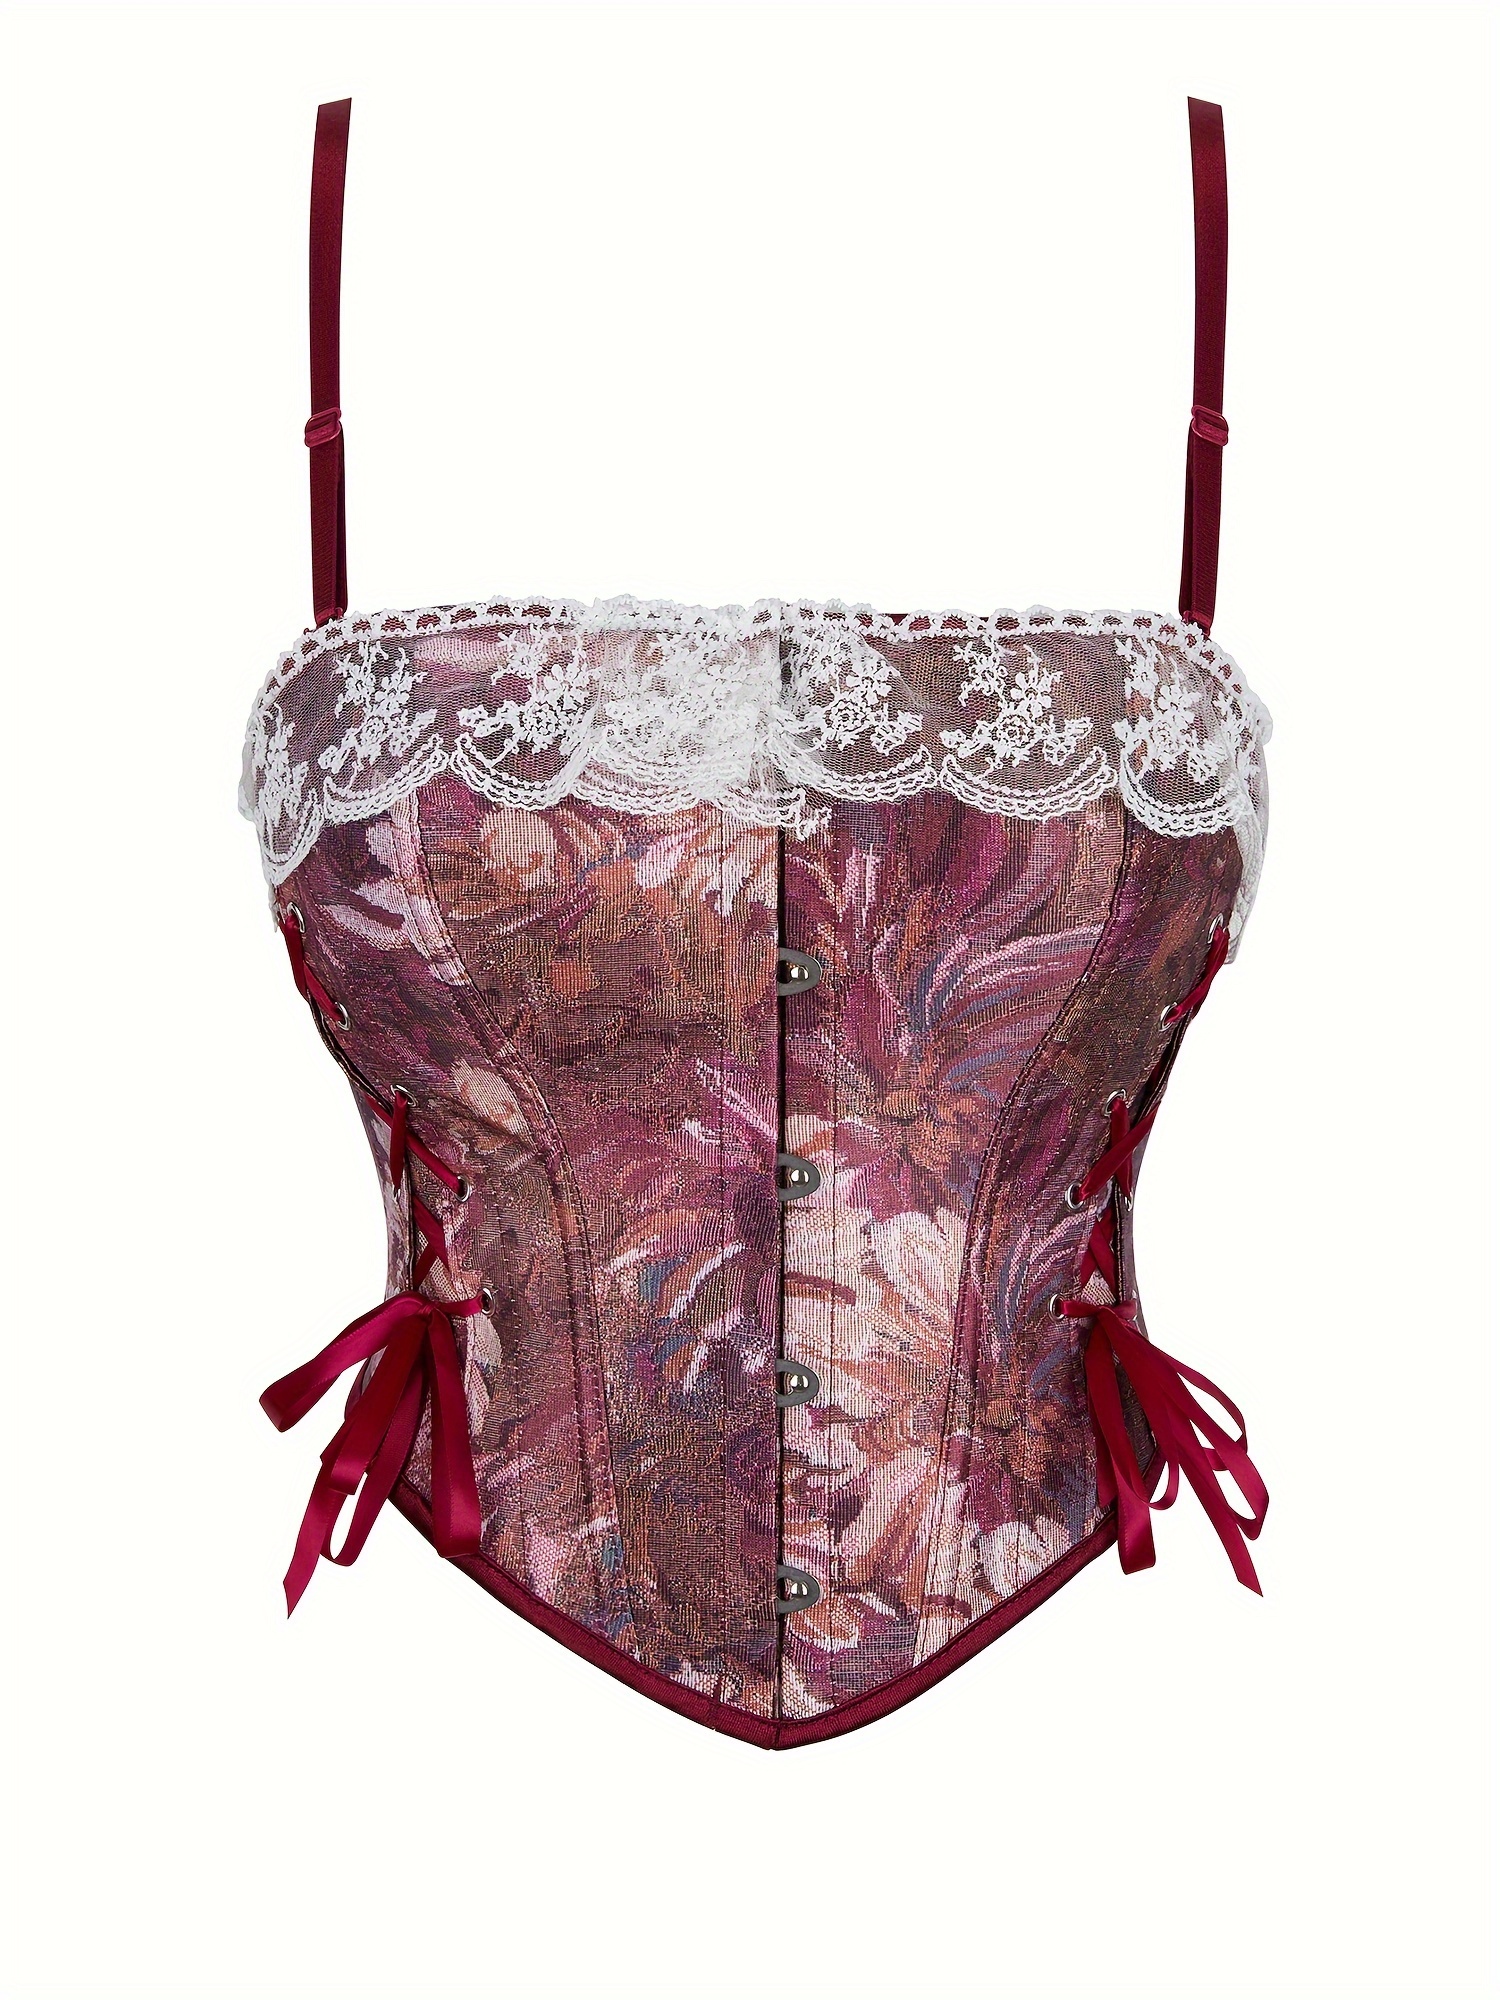  Banamic Bustier Tops for Women Corset Top Spaghetti Strap Crop Top  Lace Bralette Wine Red: Clothing, Shoes & Jewelry